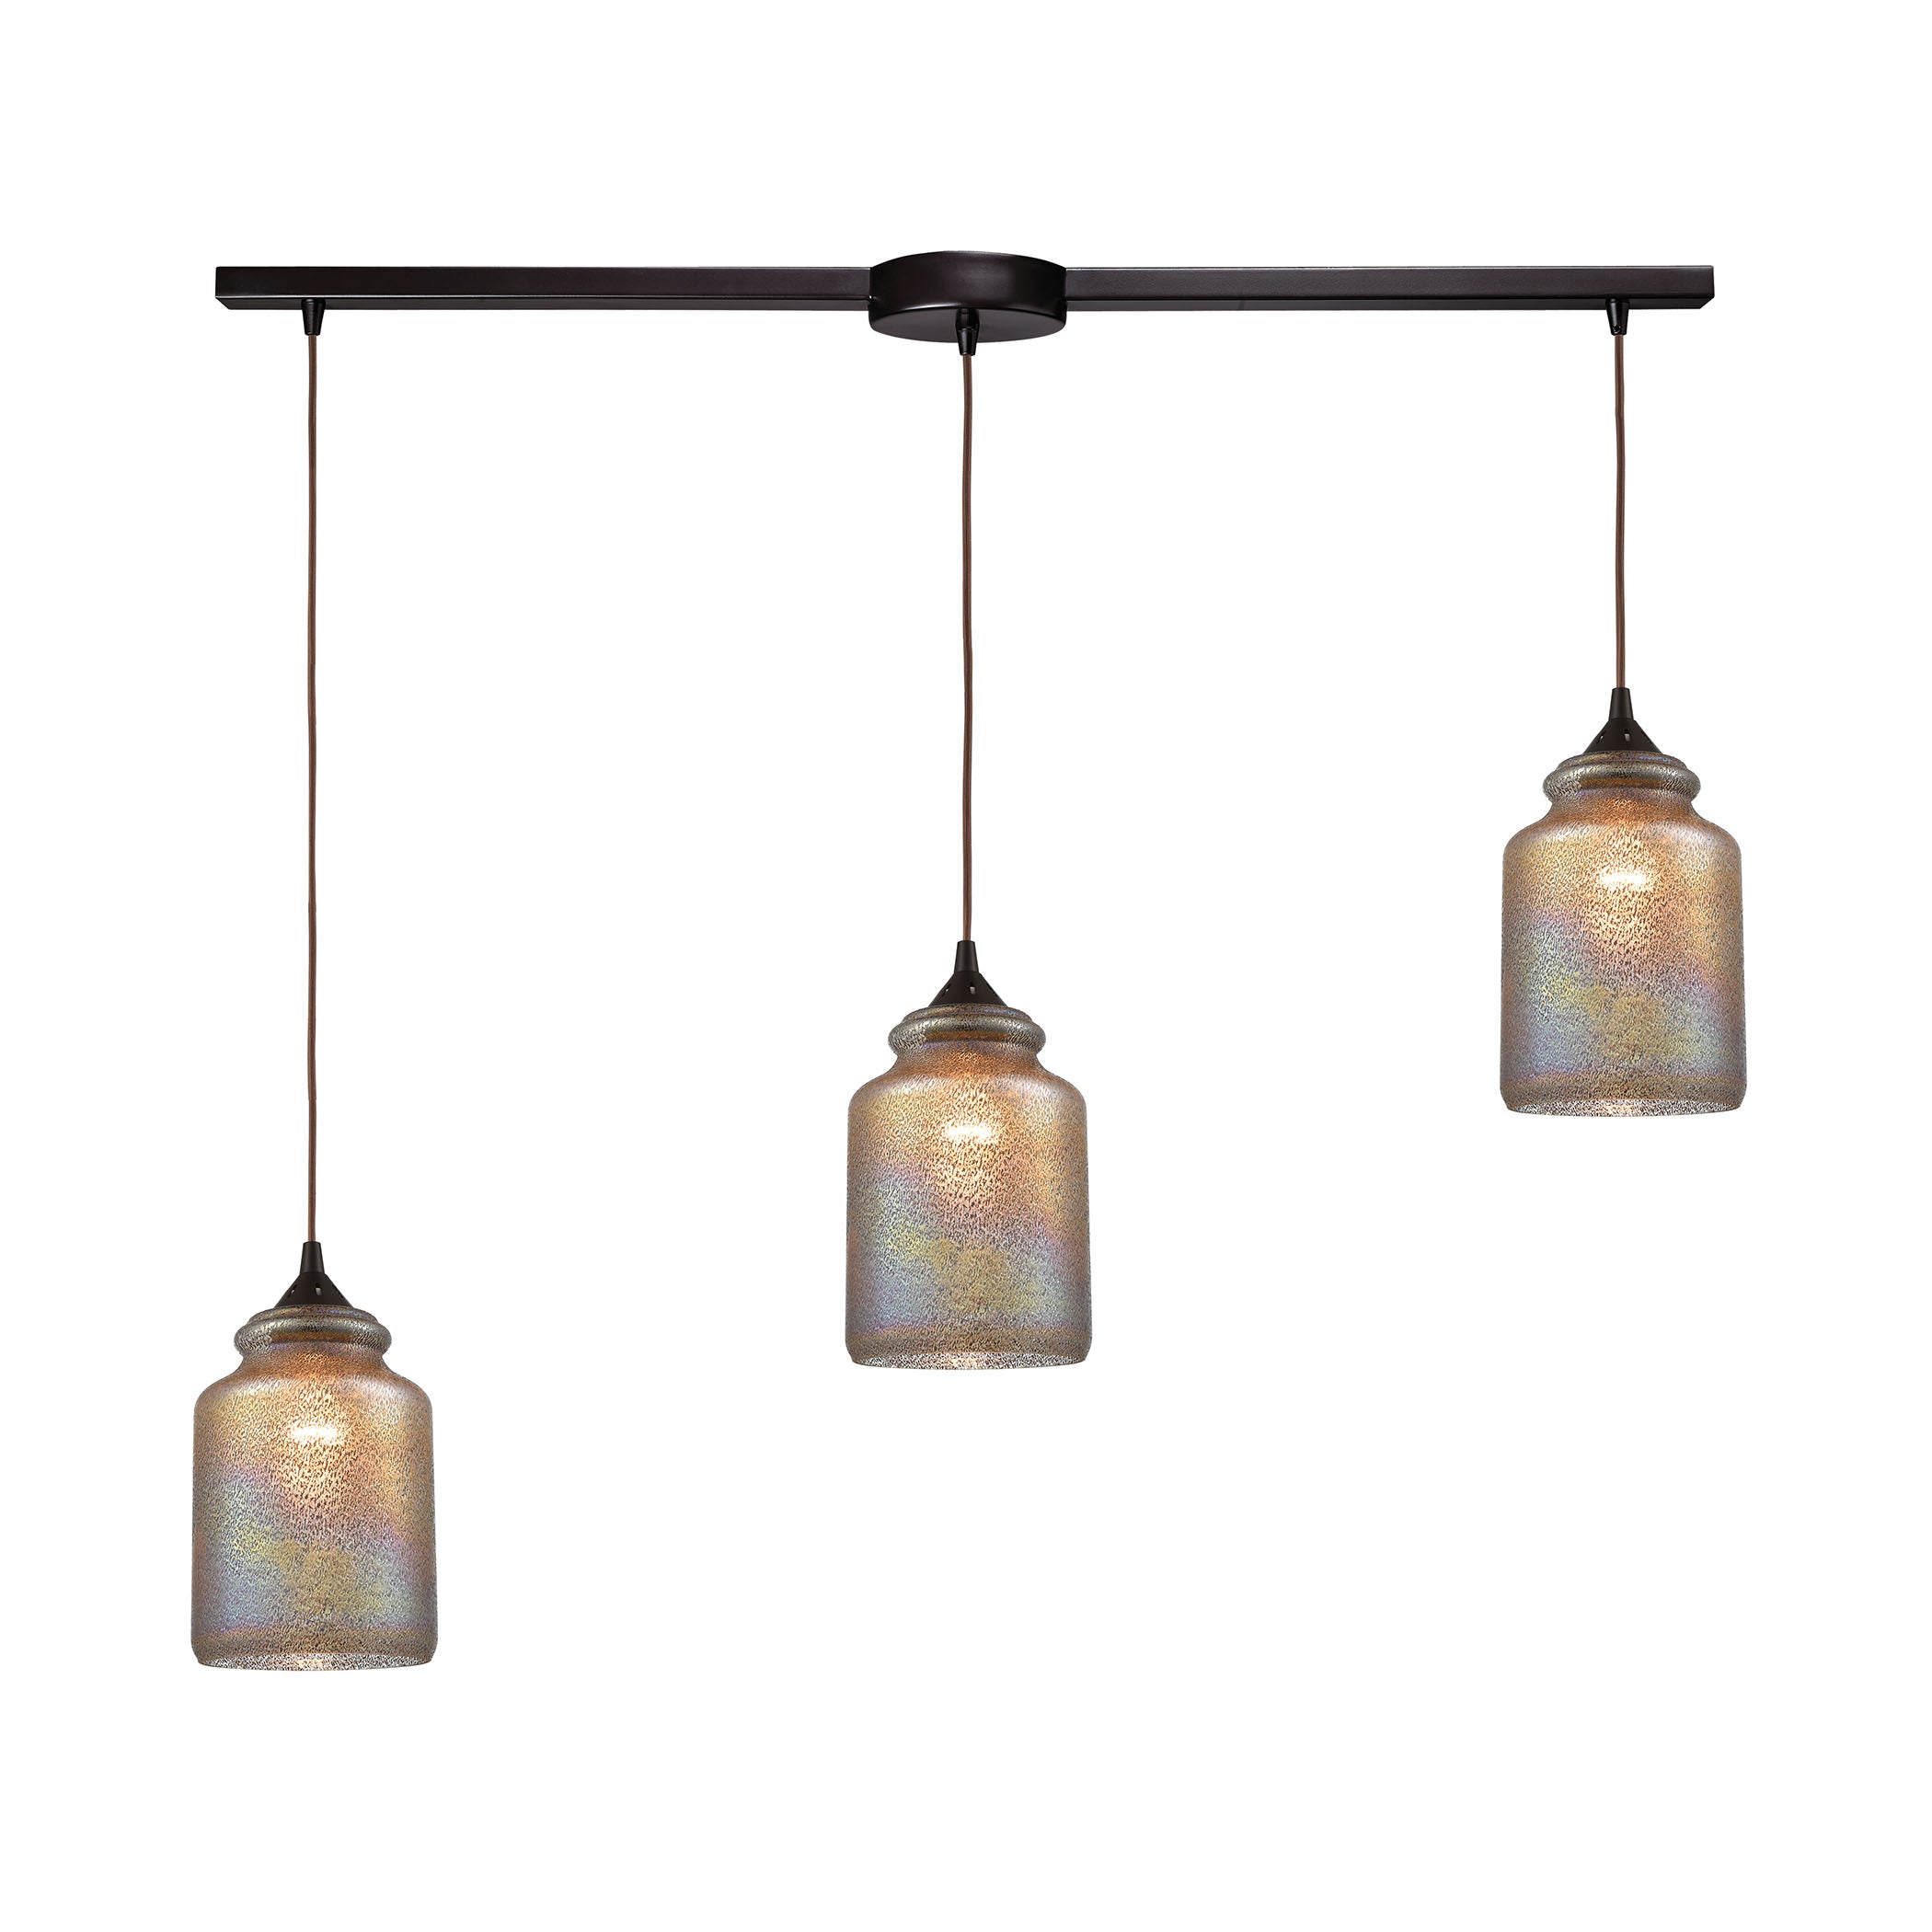 ELK Lighting 85257/3L Illuminessence 3-Light Linear Mini Pendant Fixture in Oiled Bronze with Textured Dichroic Glass